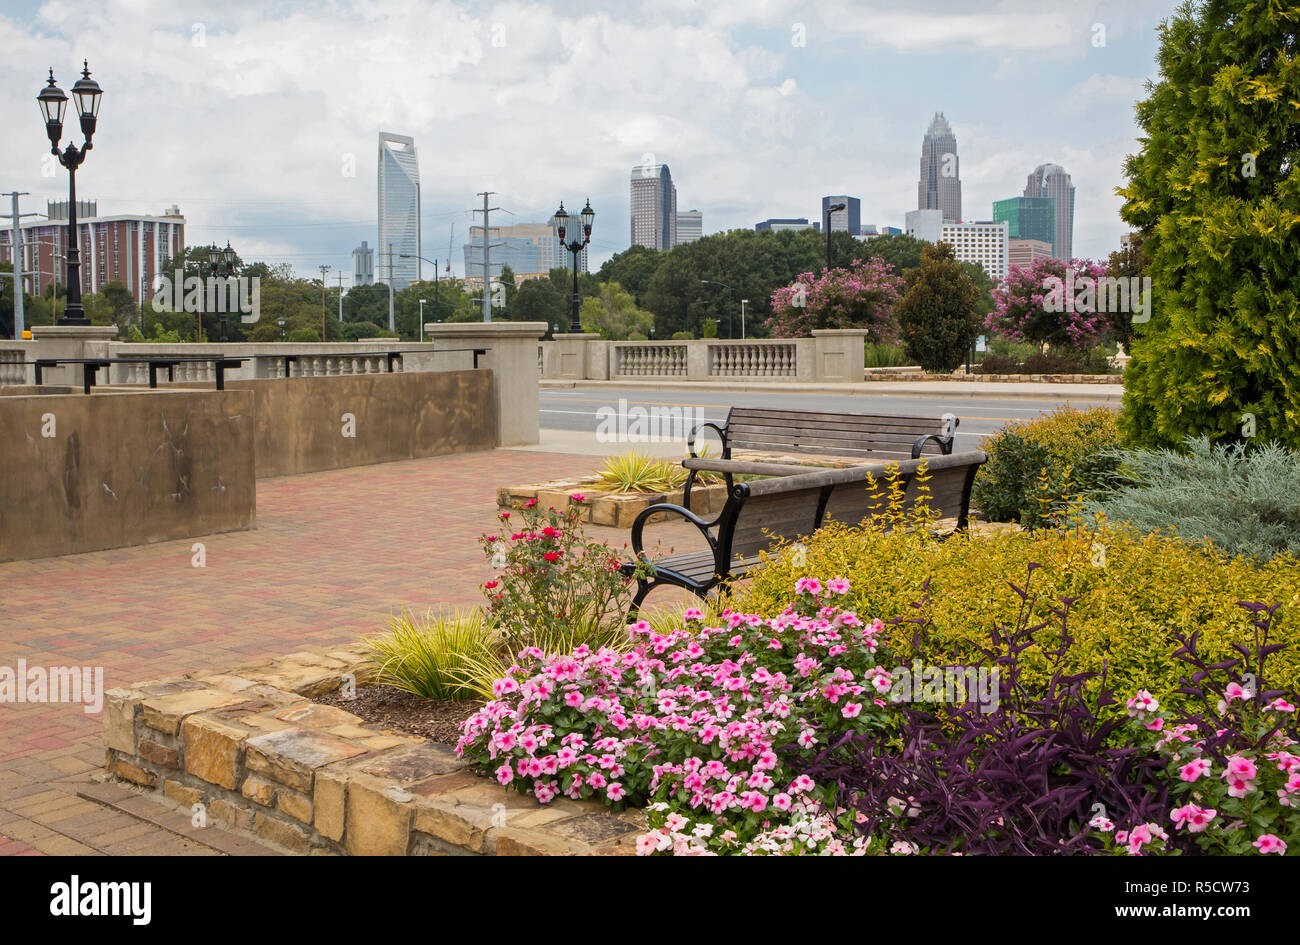 Urban greenway with park benches and flowers near downtown Charlotte, North Carolina. Stock Photo